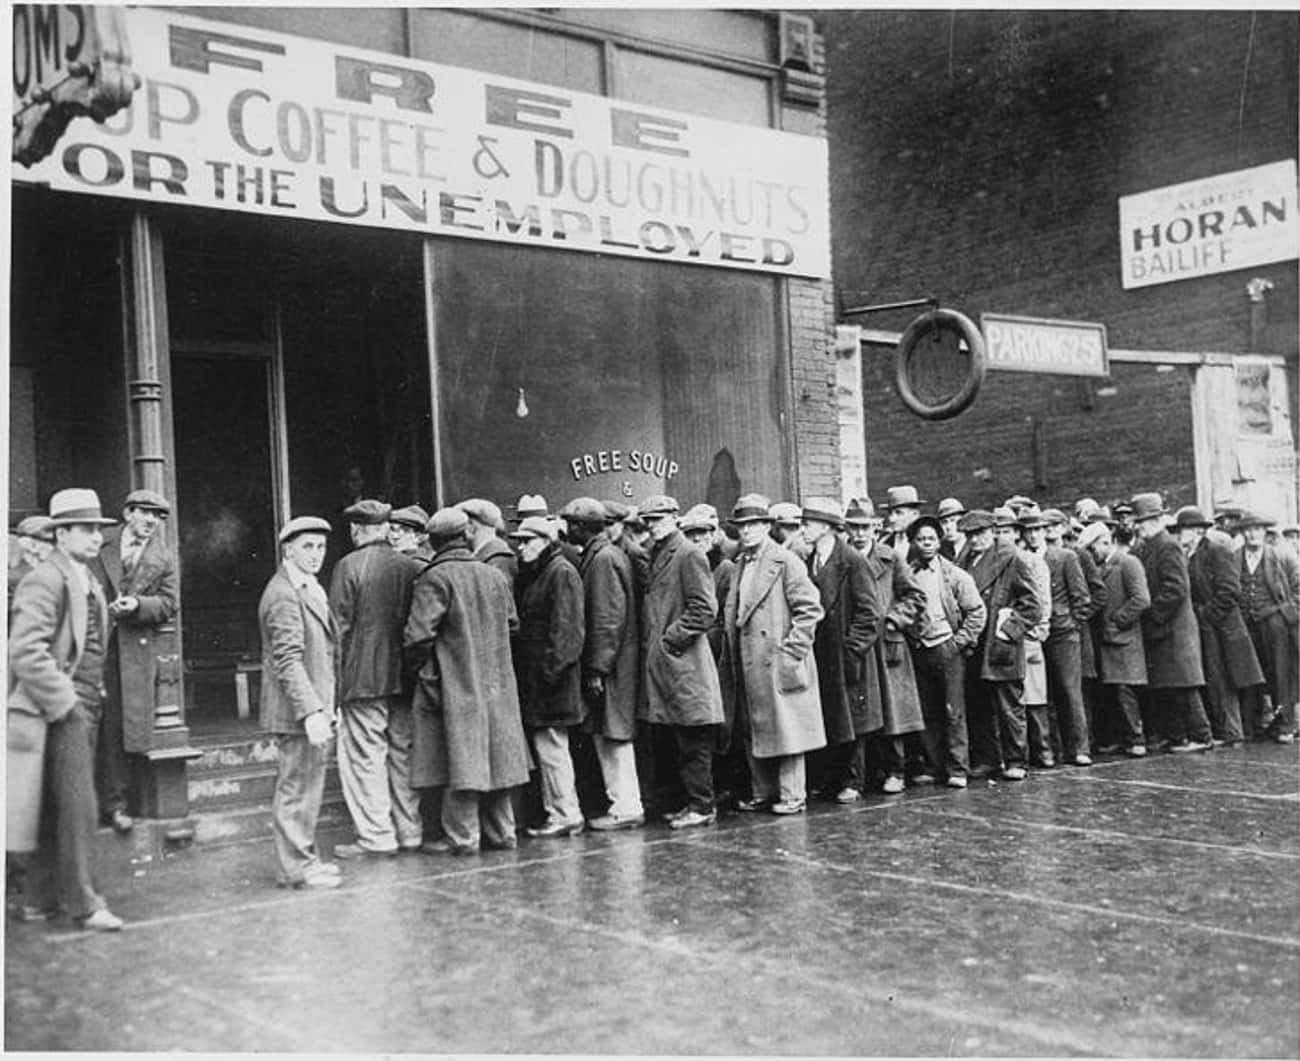 The United States Stock Market Crashes in 1929